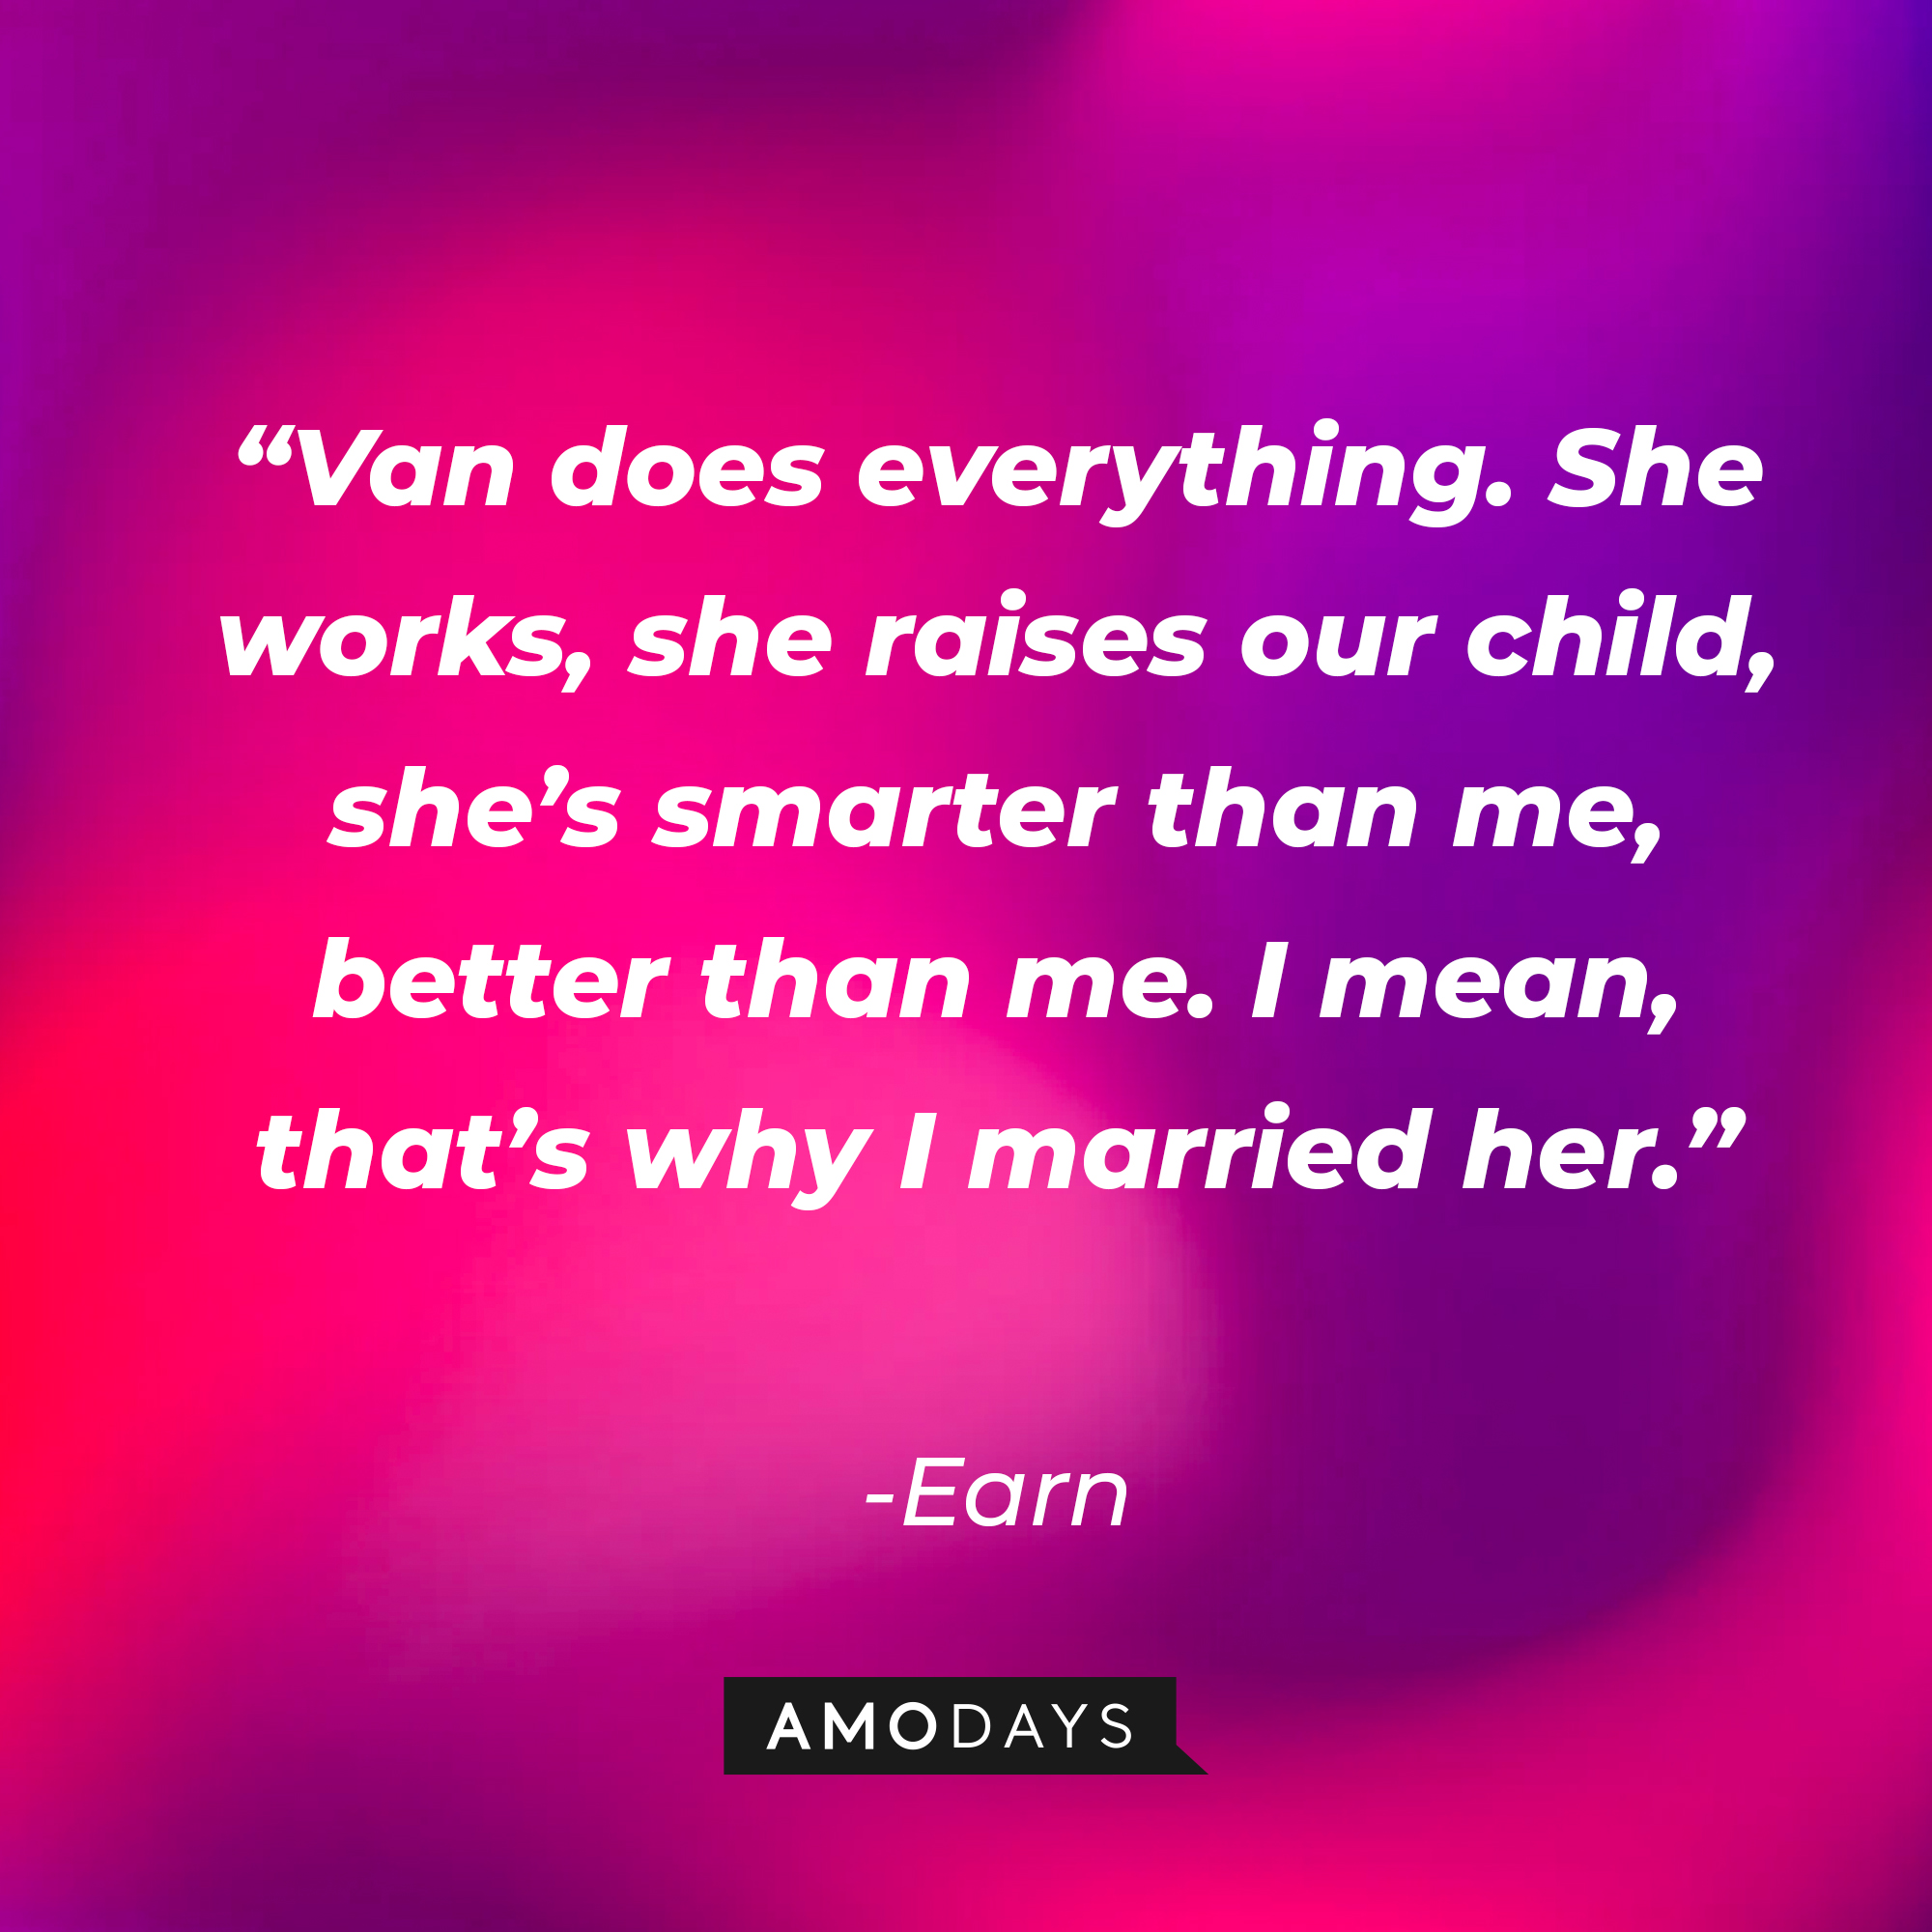 Earn’s quote: “Van does everything. She works, she raises our child, she’s smarter than me, better than me. I mean, that’s why I married her.” | Source: AmoDays